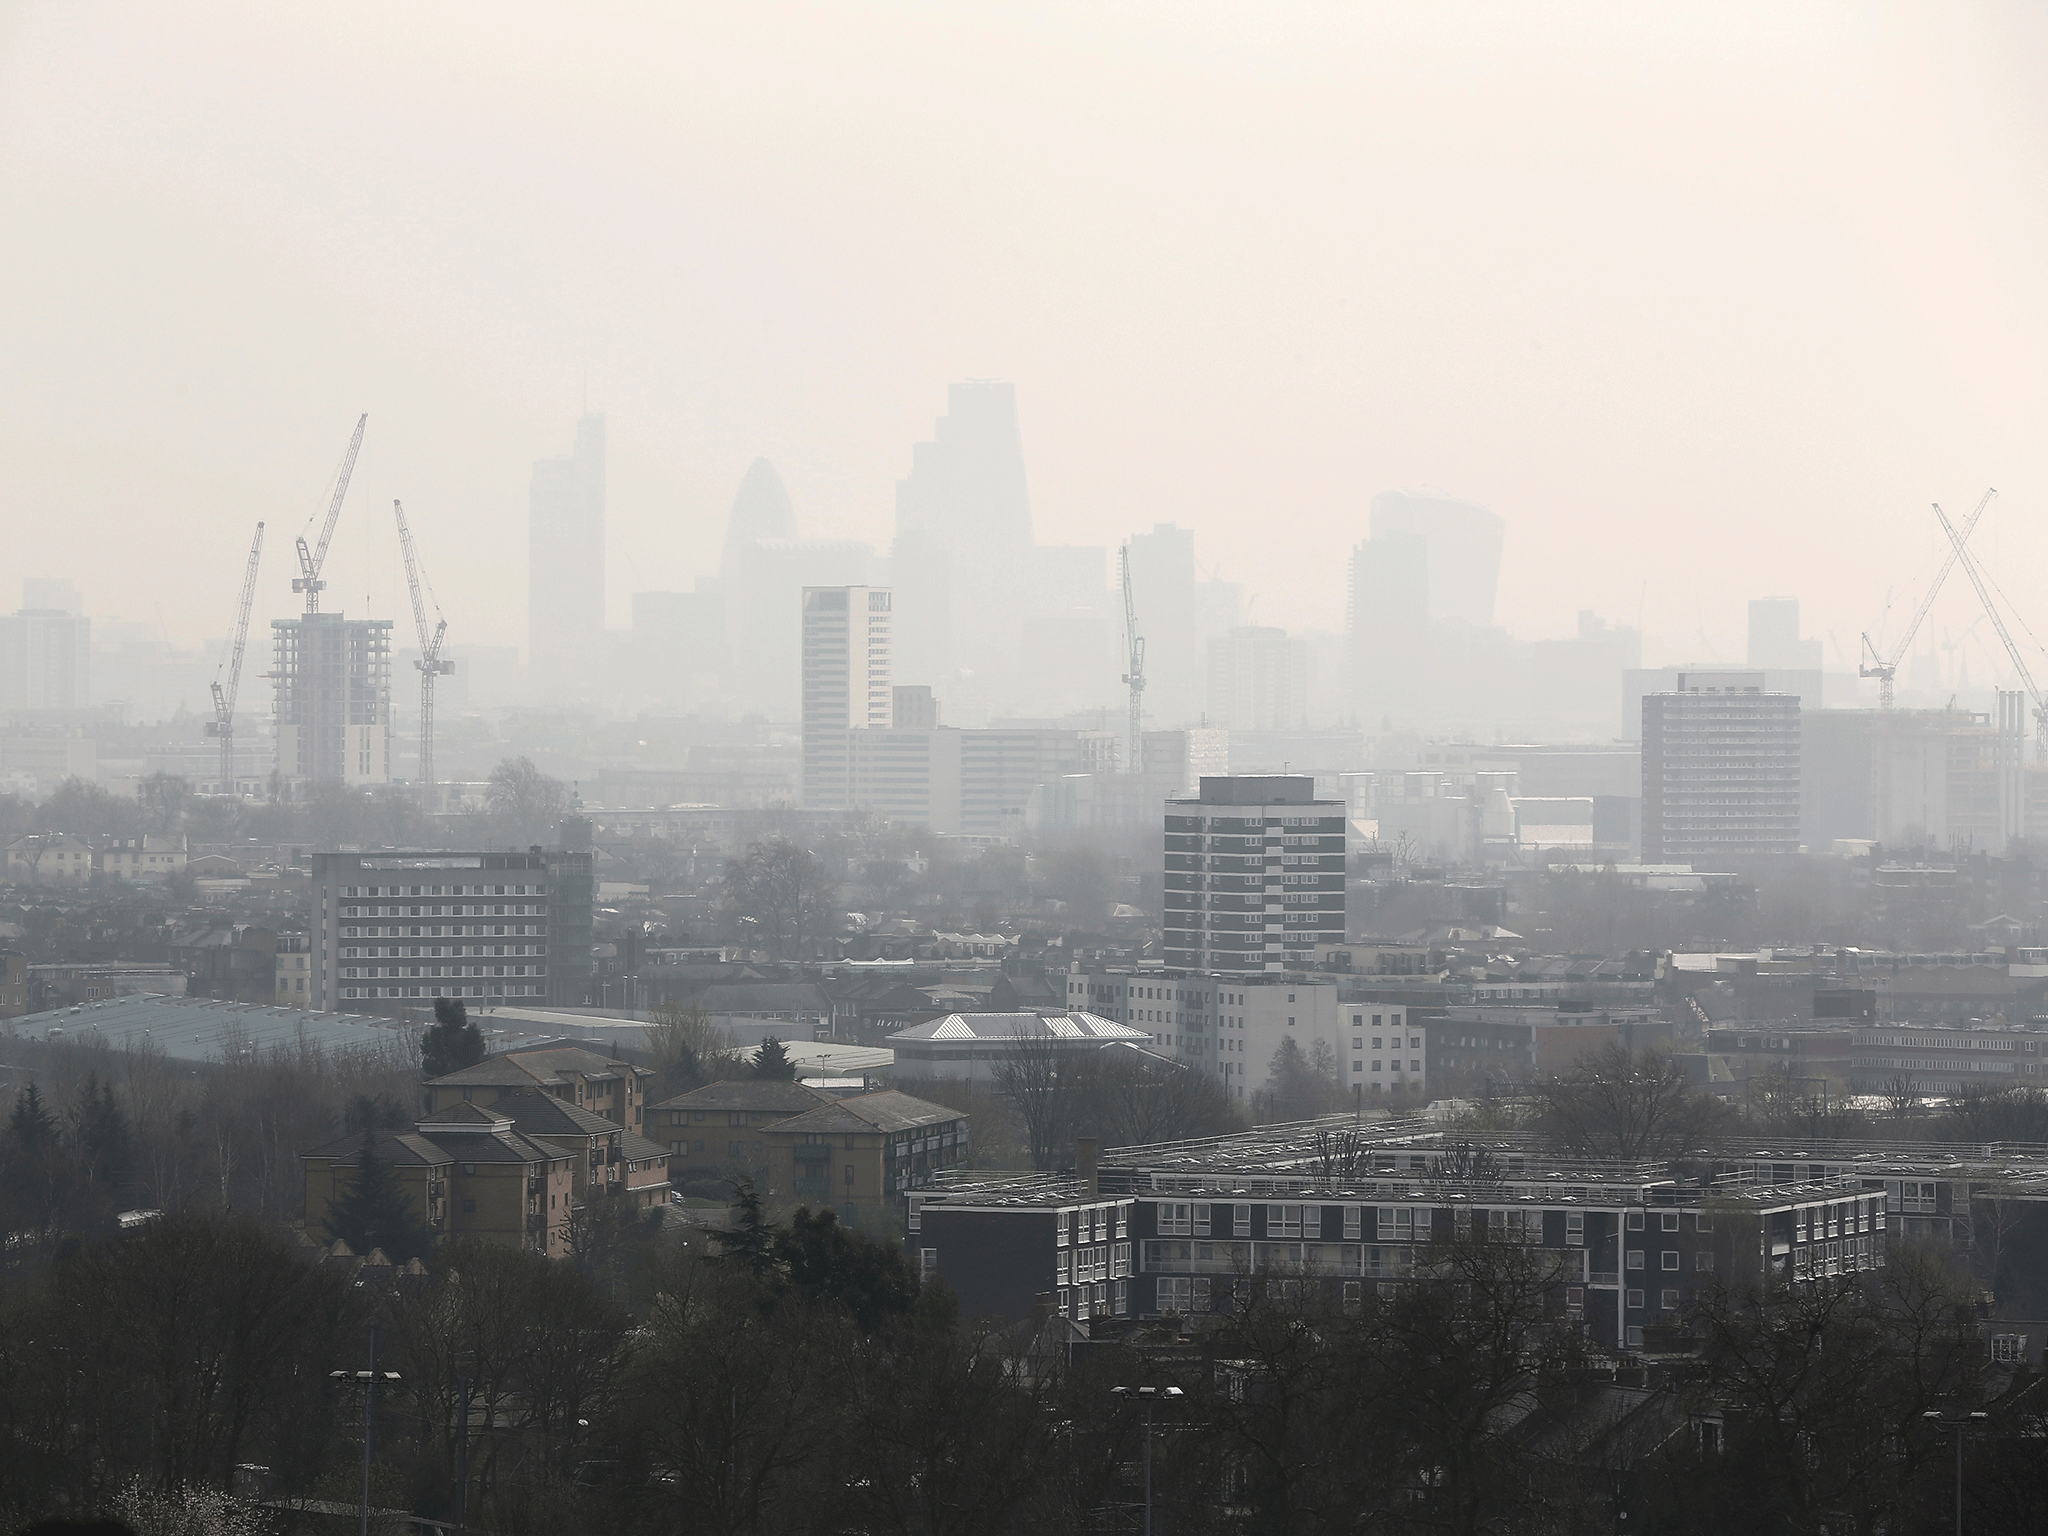 Diesel drivers 'will be protected from crackdown on polluting car'